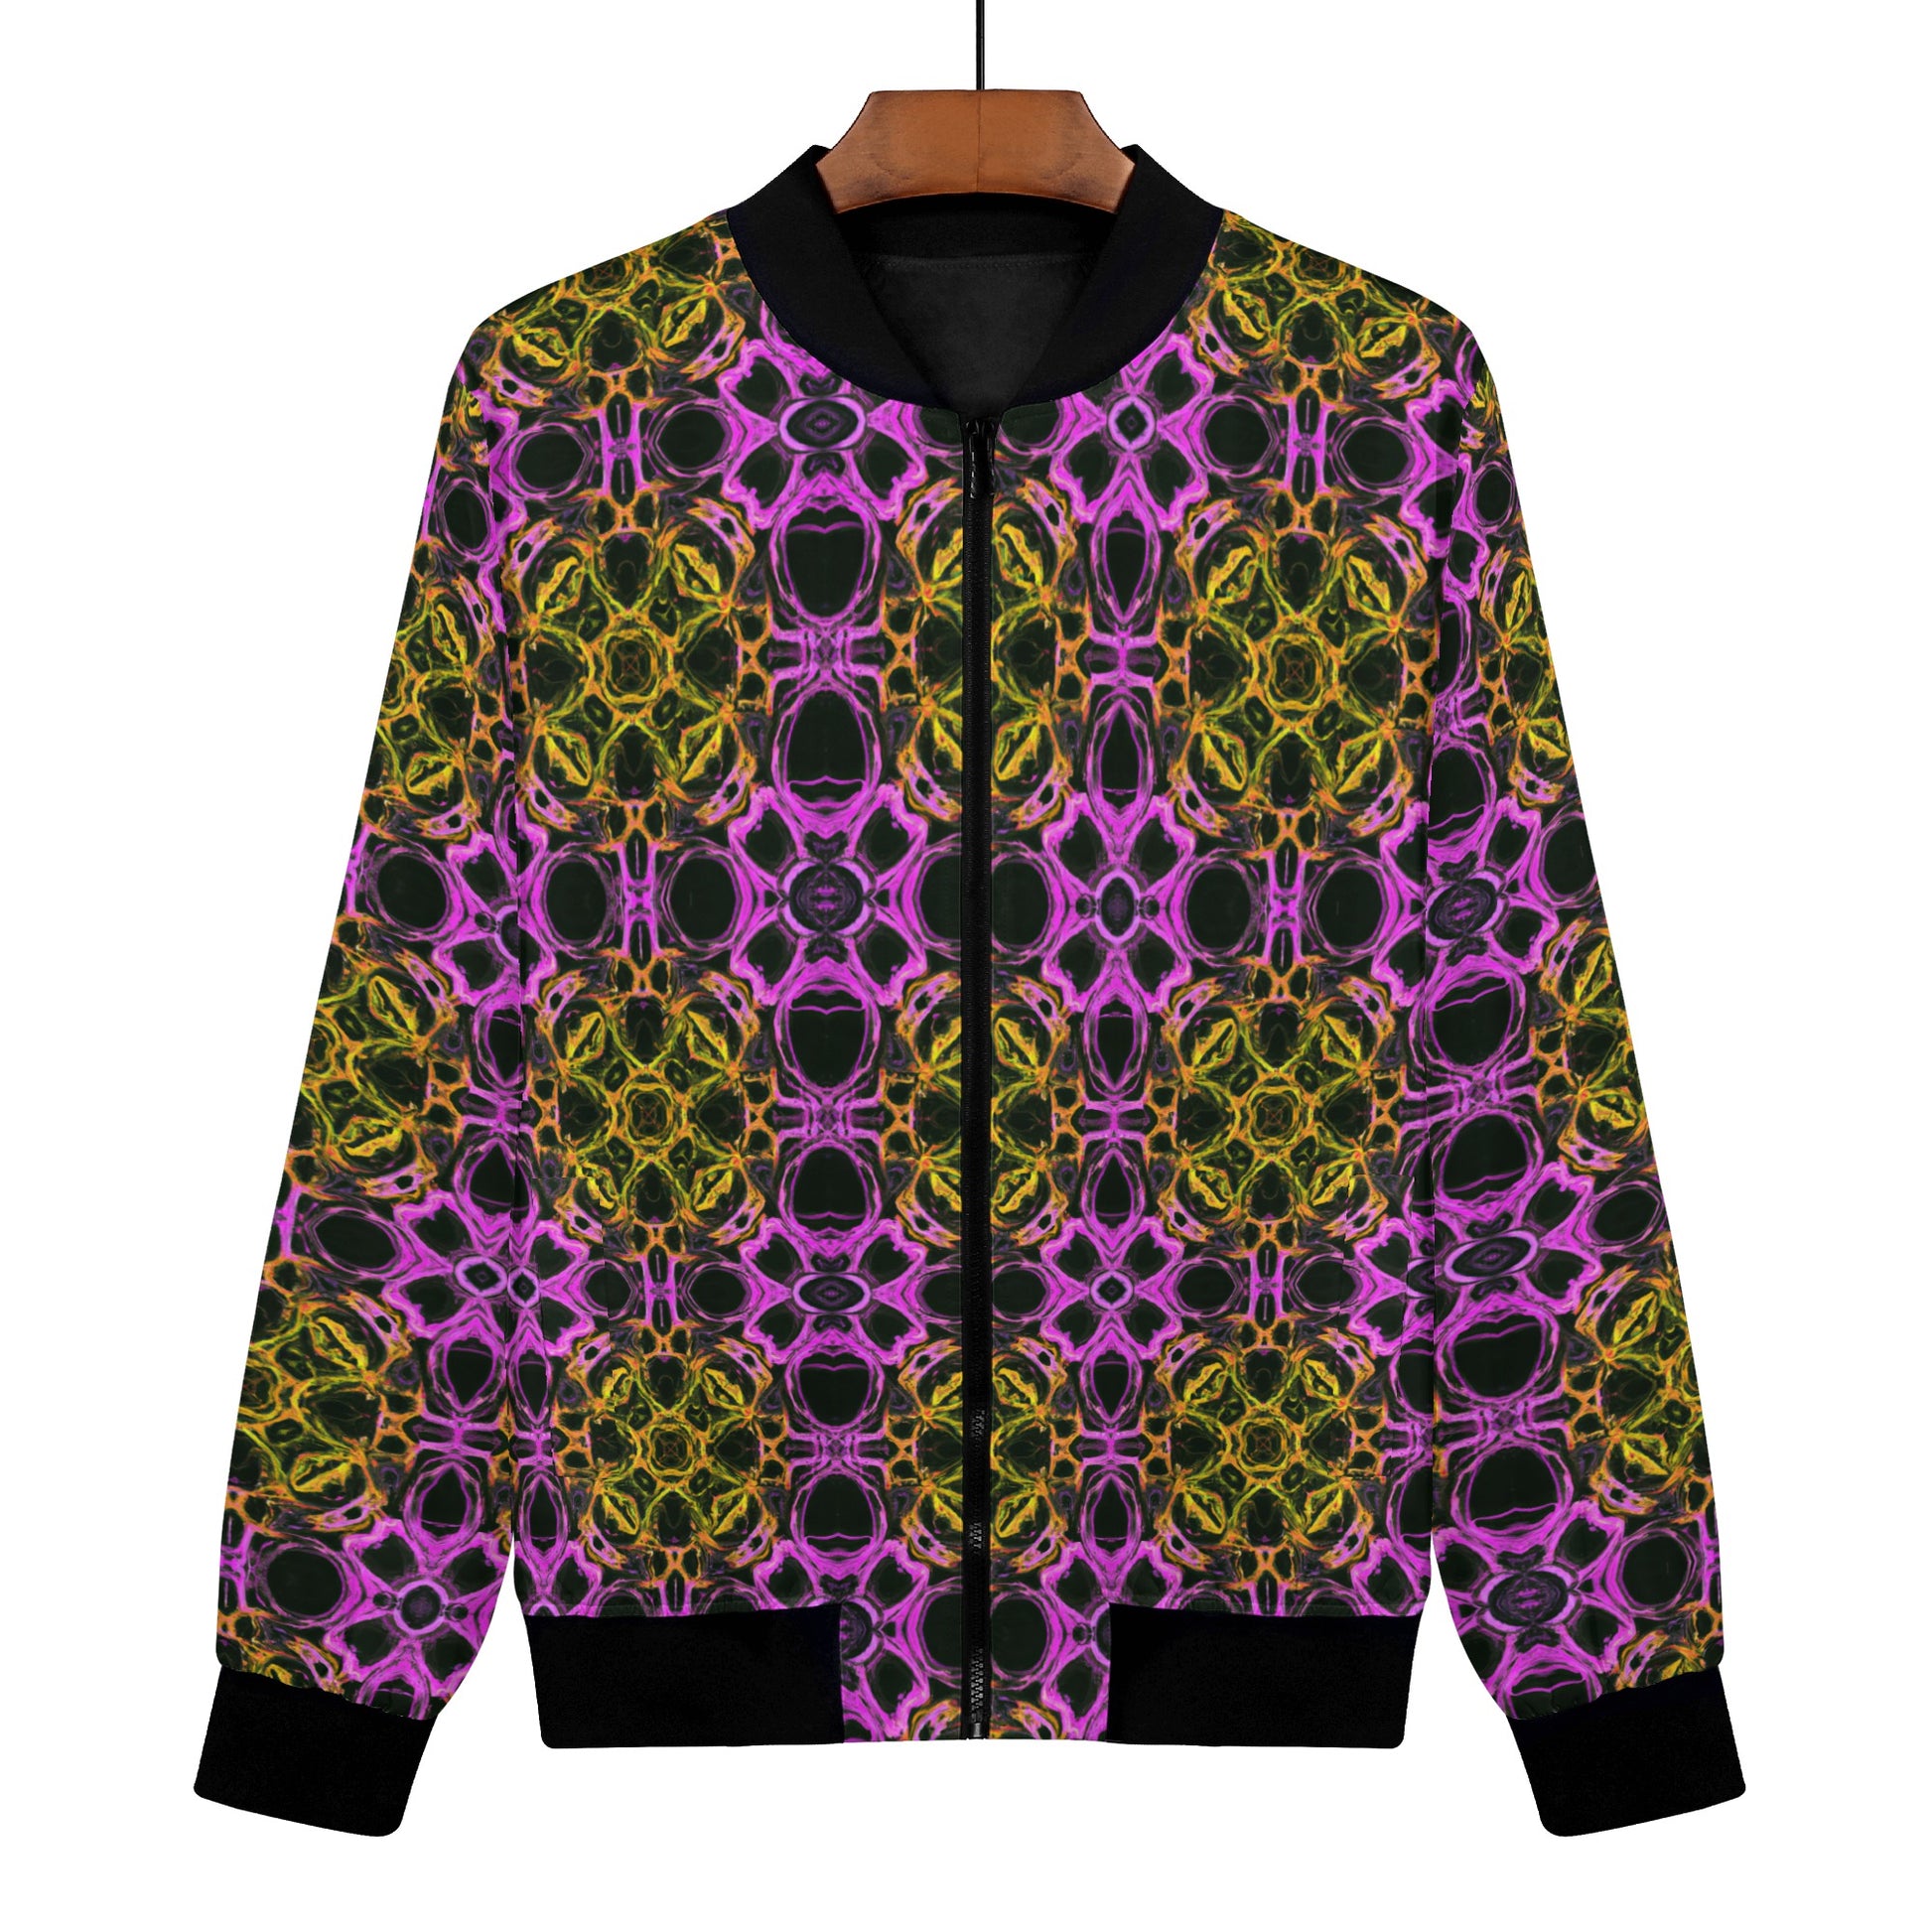 The Psychedelia Honeycomb Women's Bomber Jacket is a thrilling piece that awaits your next adventure. With its digitally printed design, this jacket showcases an outrageous and vibrant pattern that stretches across the entire garment, leaving a lasting impression. 